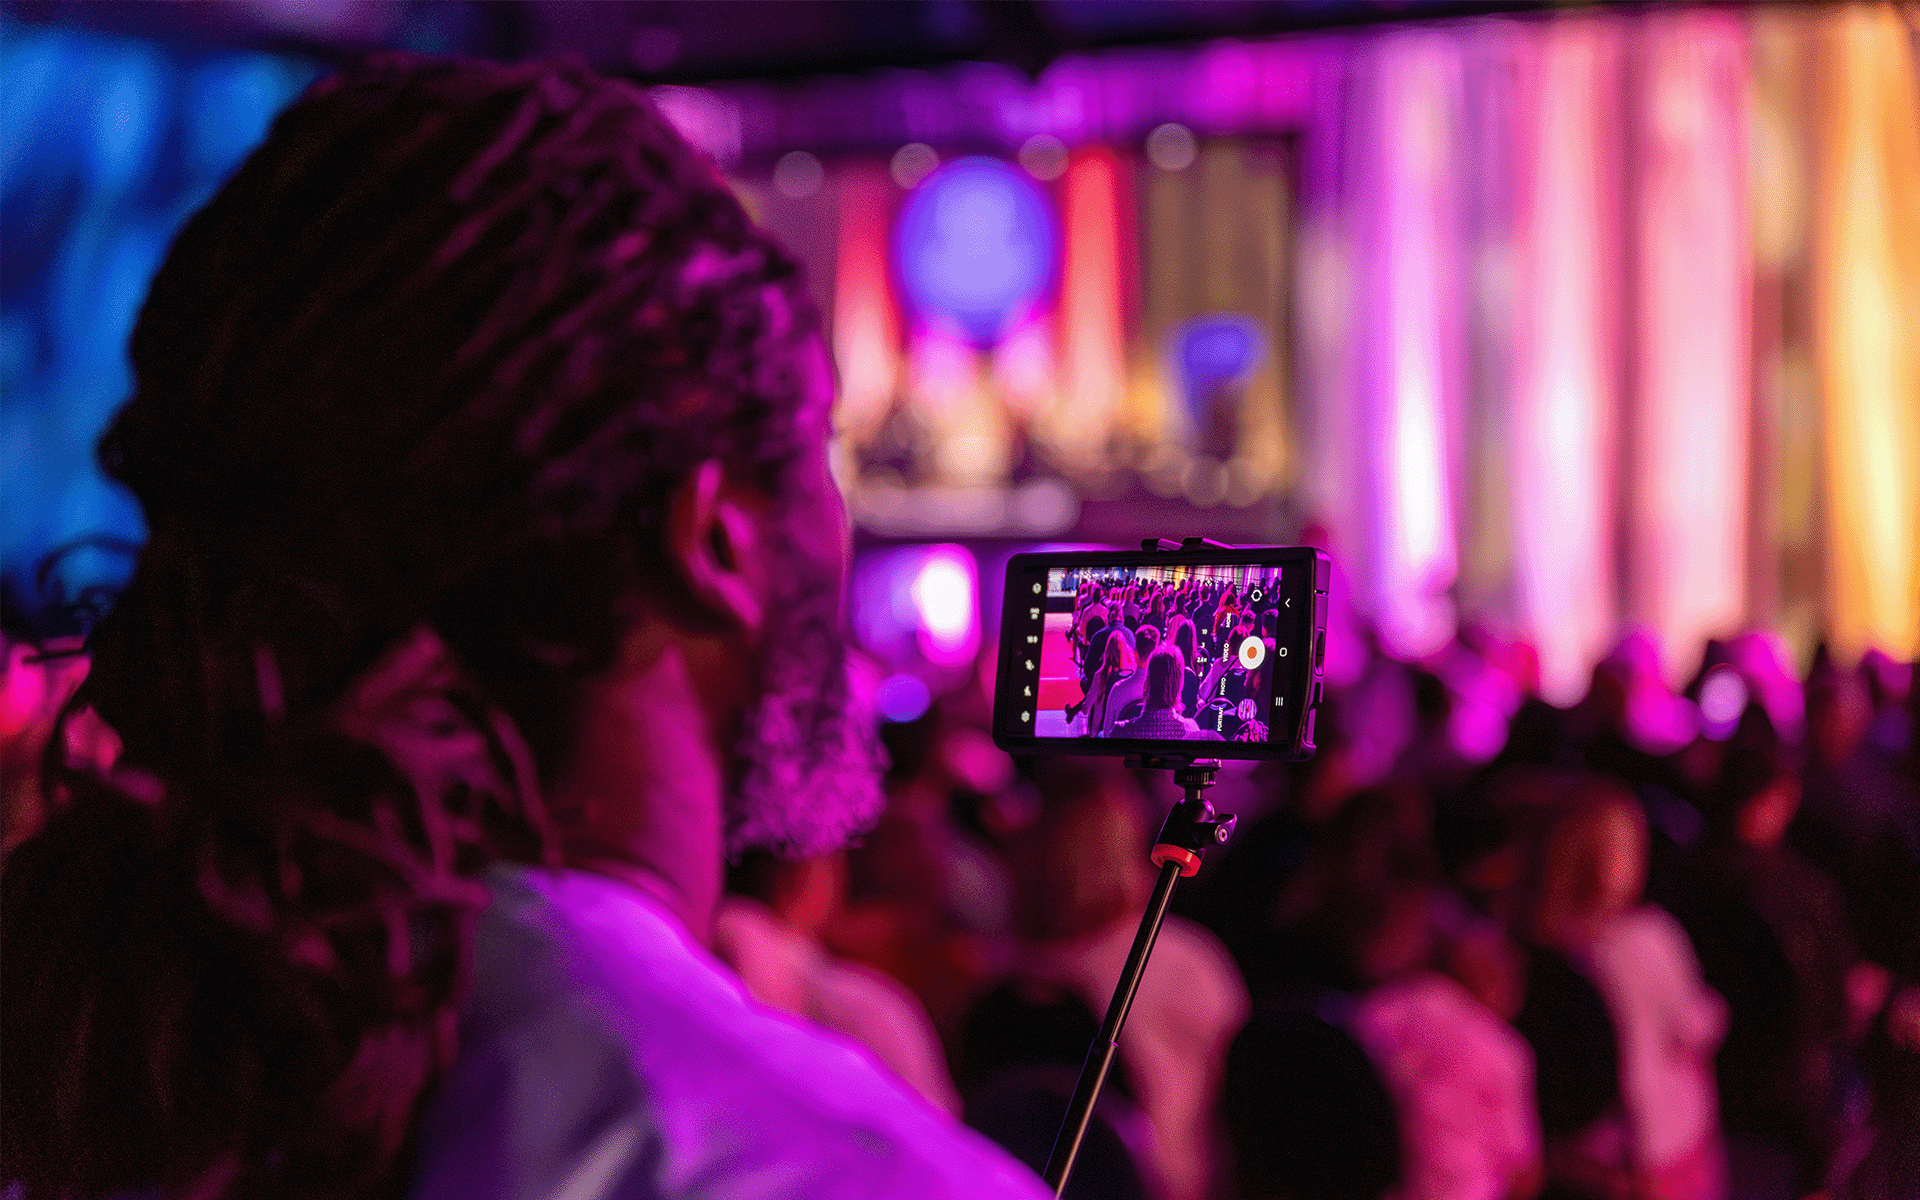 Person watching the ceremony and recording on their phone